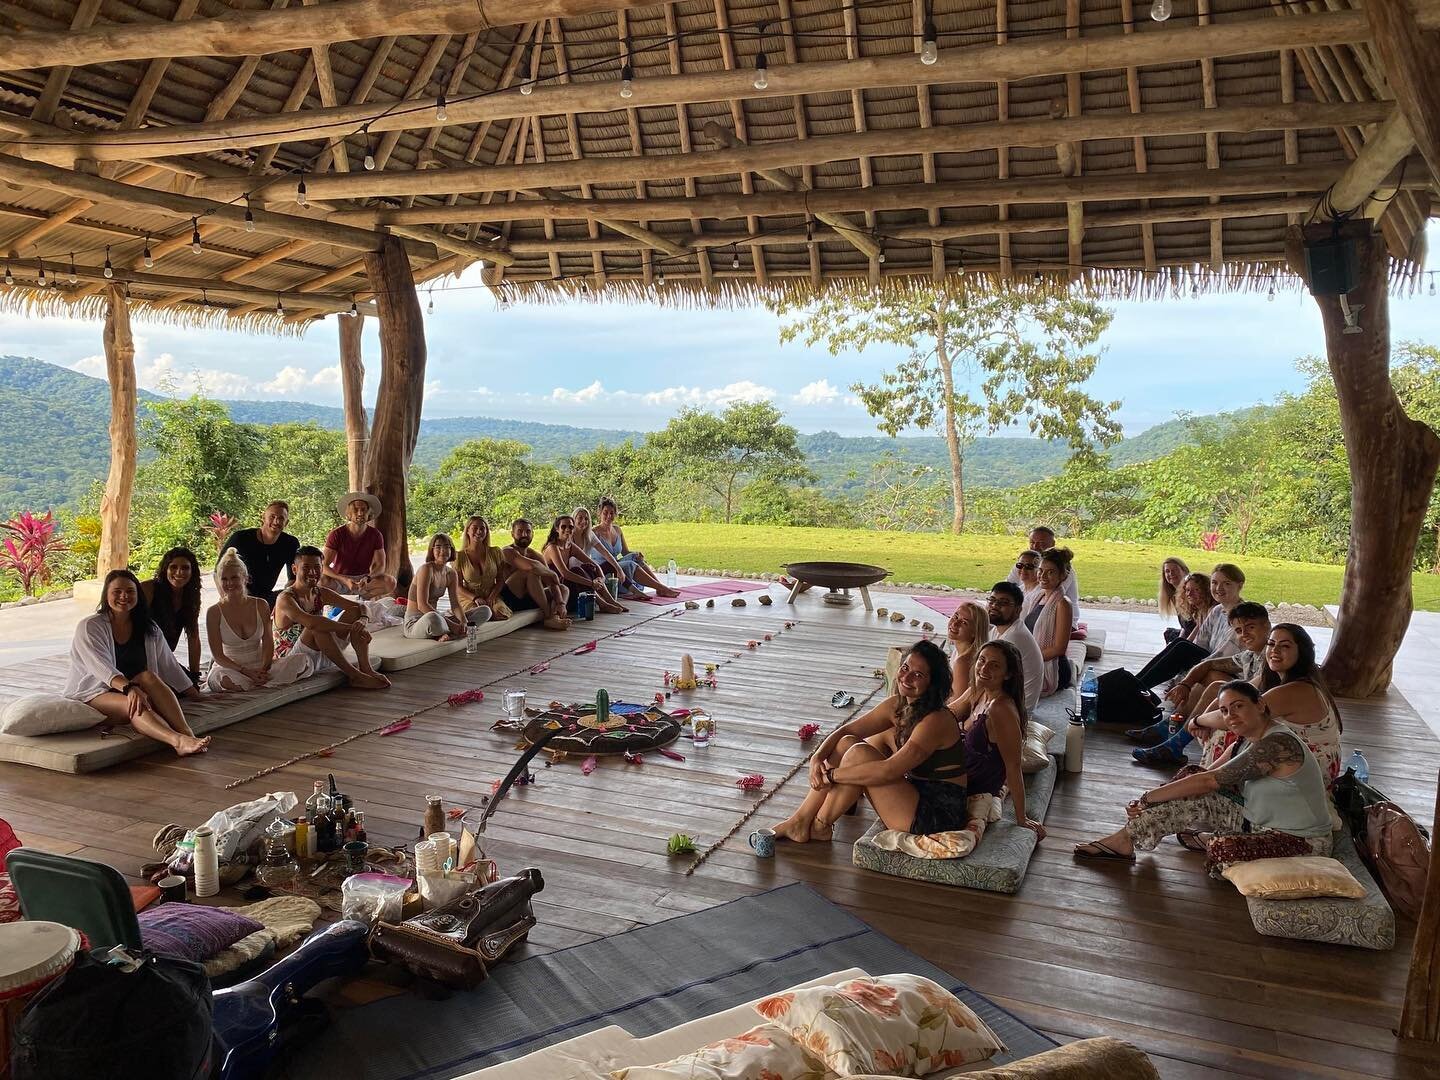 We are NOW taking applications... for our next Costa Rica Plant Medicine retreat!

👉 LINK in BIO for details

PS. We only have 13 spots left 

When:

November 8 - 14, 2022

What:

This is a 6 Night Plant Medicine Retreat hosted in Nosara, Costa Rica